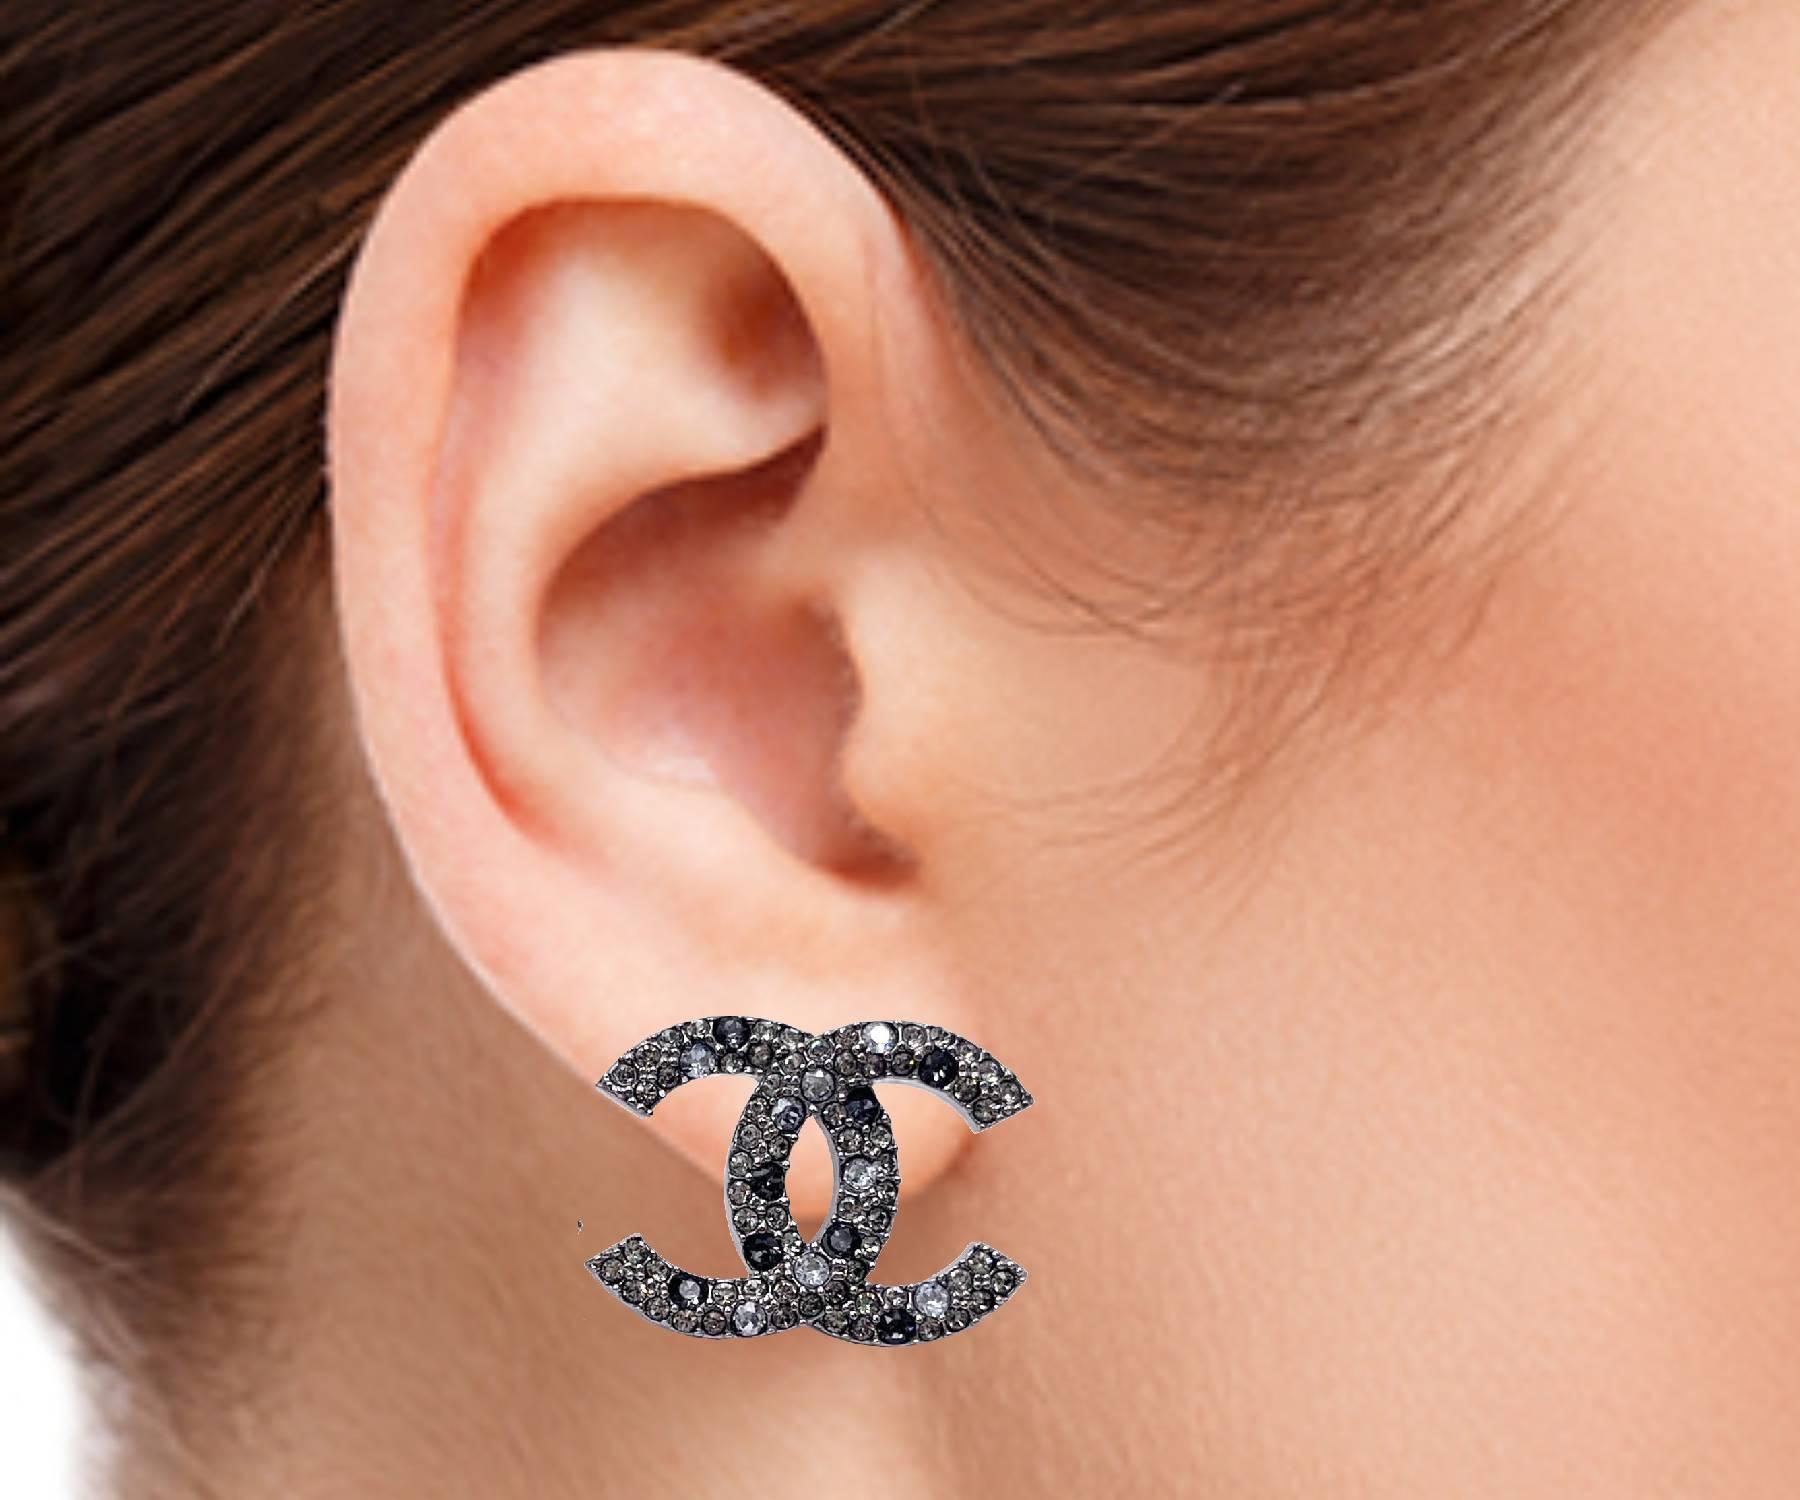 Chanel Grey CC Grey Scattering Crystal Large Piercing Earrings In Excellent Condition For Sale In Pasadena, CA